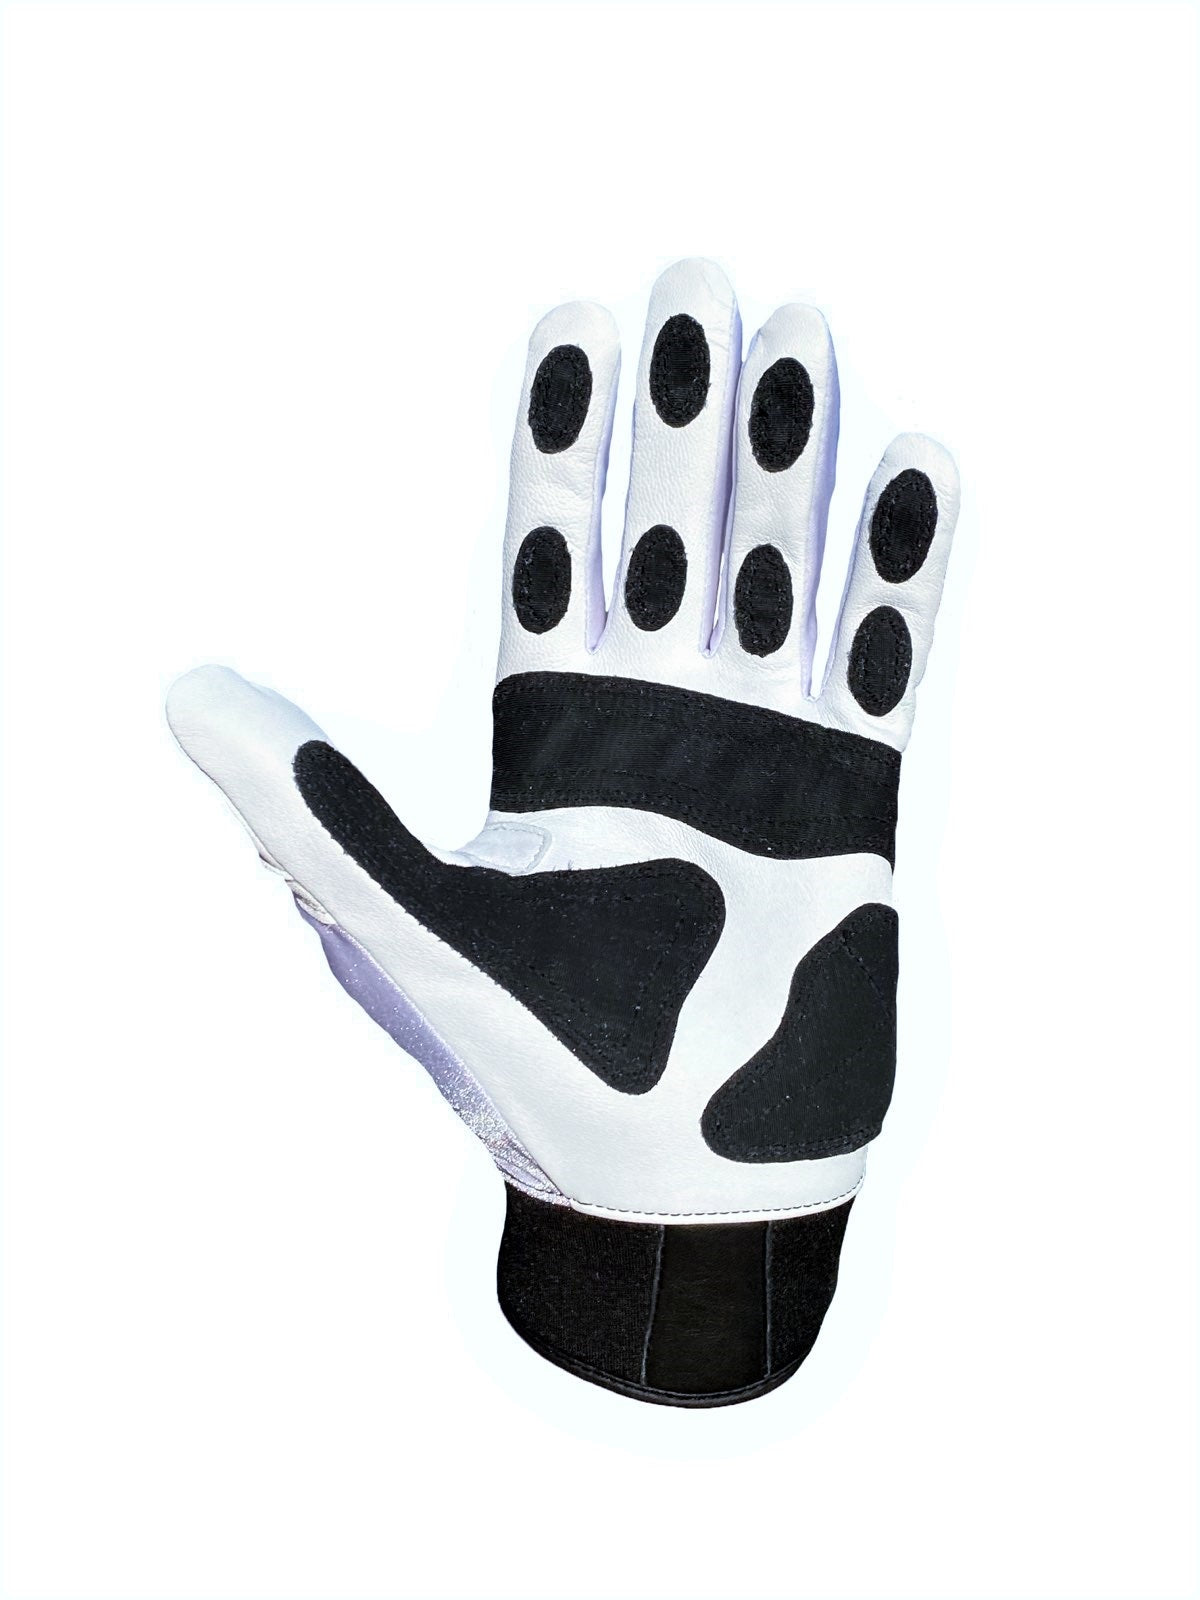 Palm view VukGripz Alpha 2.0 White Batting Gloves featuring white palm and black grip material